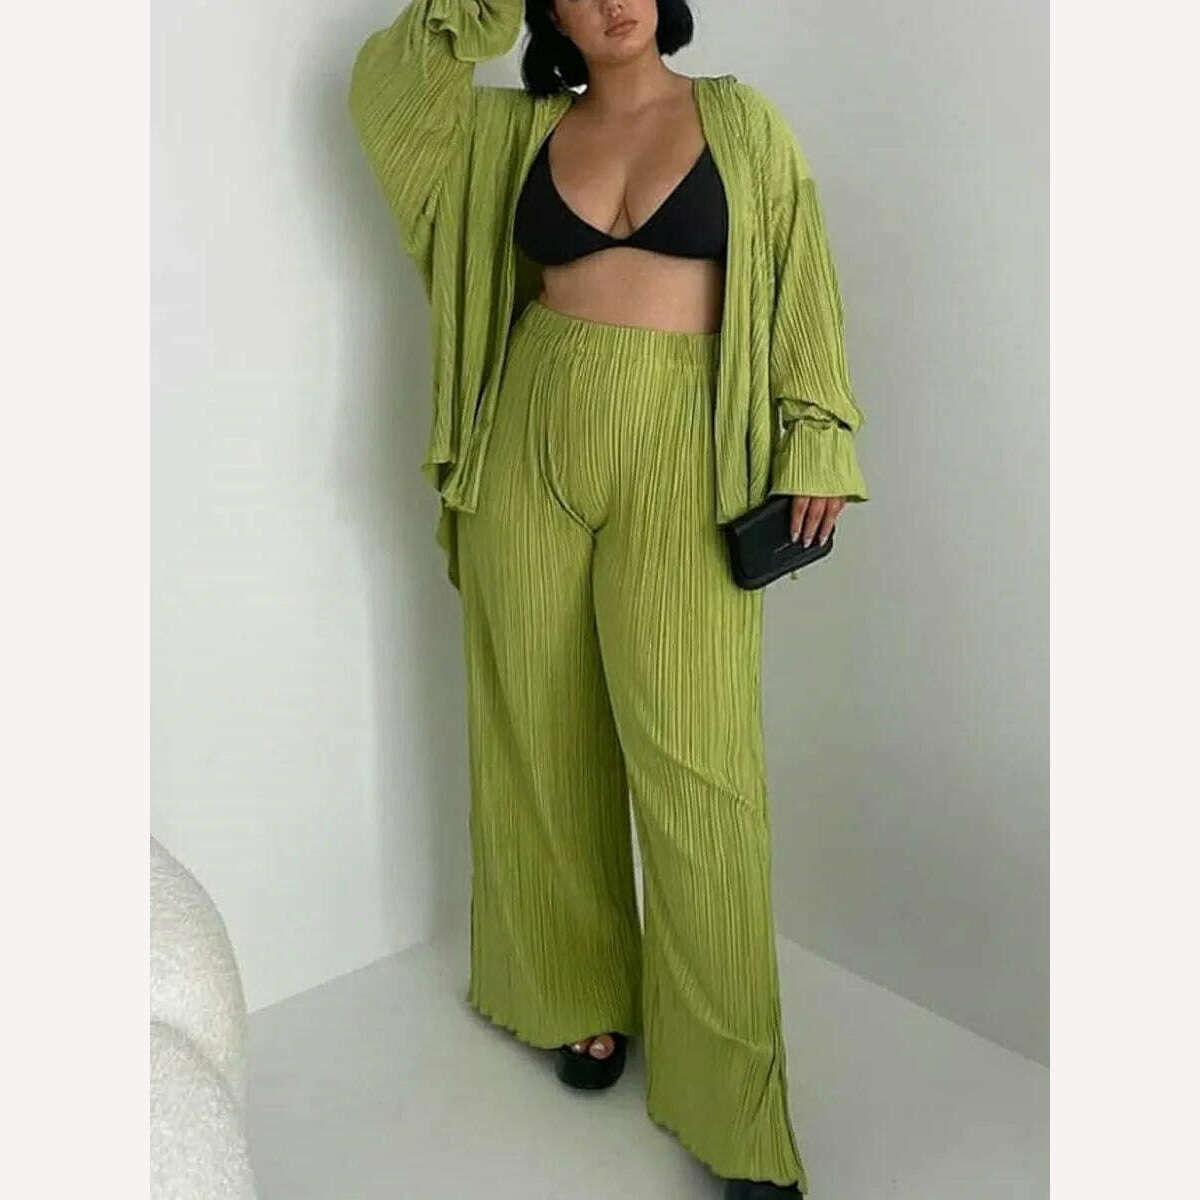 KIMLUD, wsevypo Women Two-piece Pleated Pants Suits Casual Chic Solid Color Long Sleeve Button down Shirts and Straight Leg Trousers Set, Green / S, KIMLUD Womens Clothes